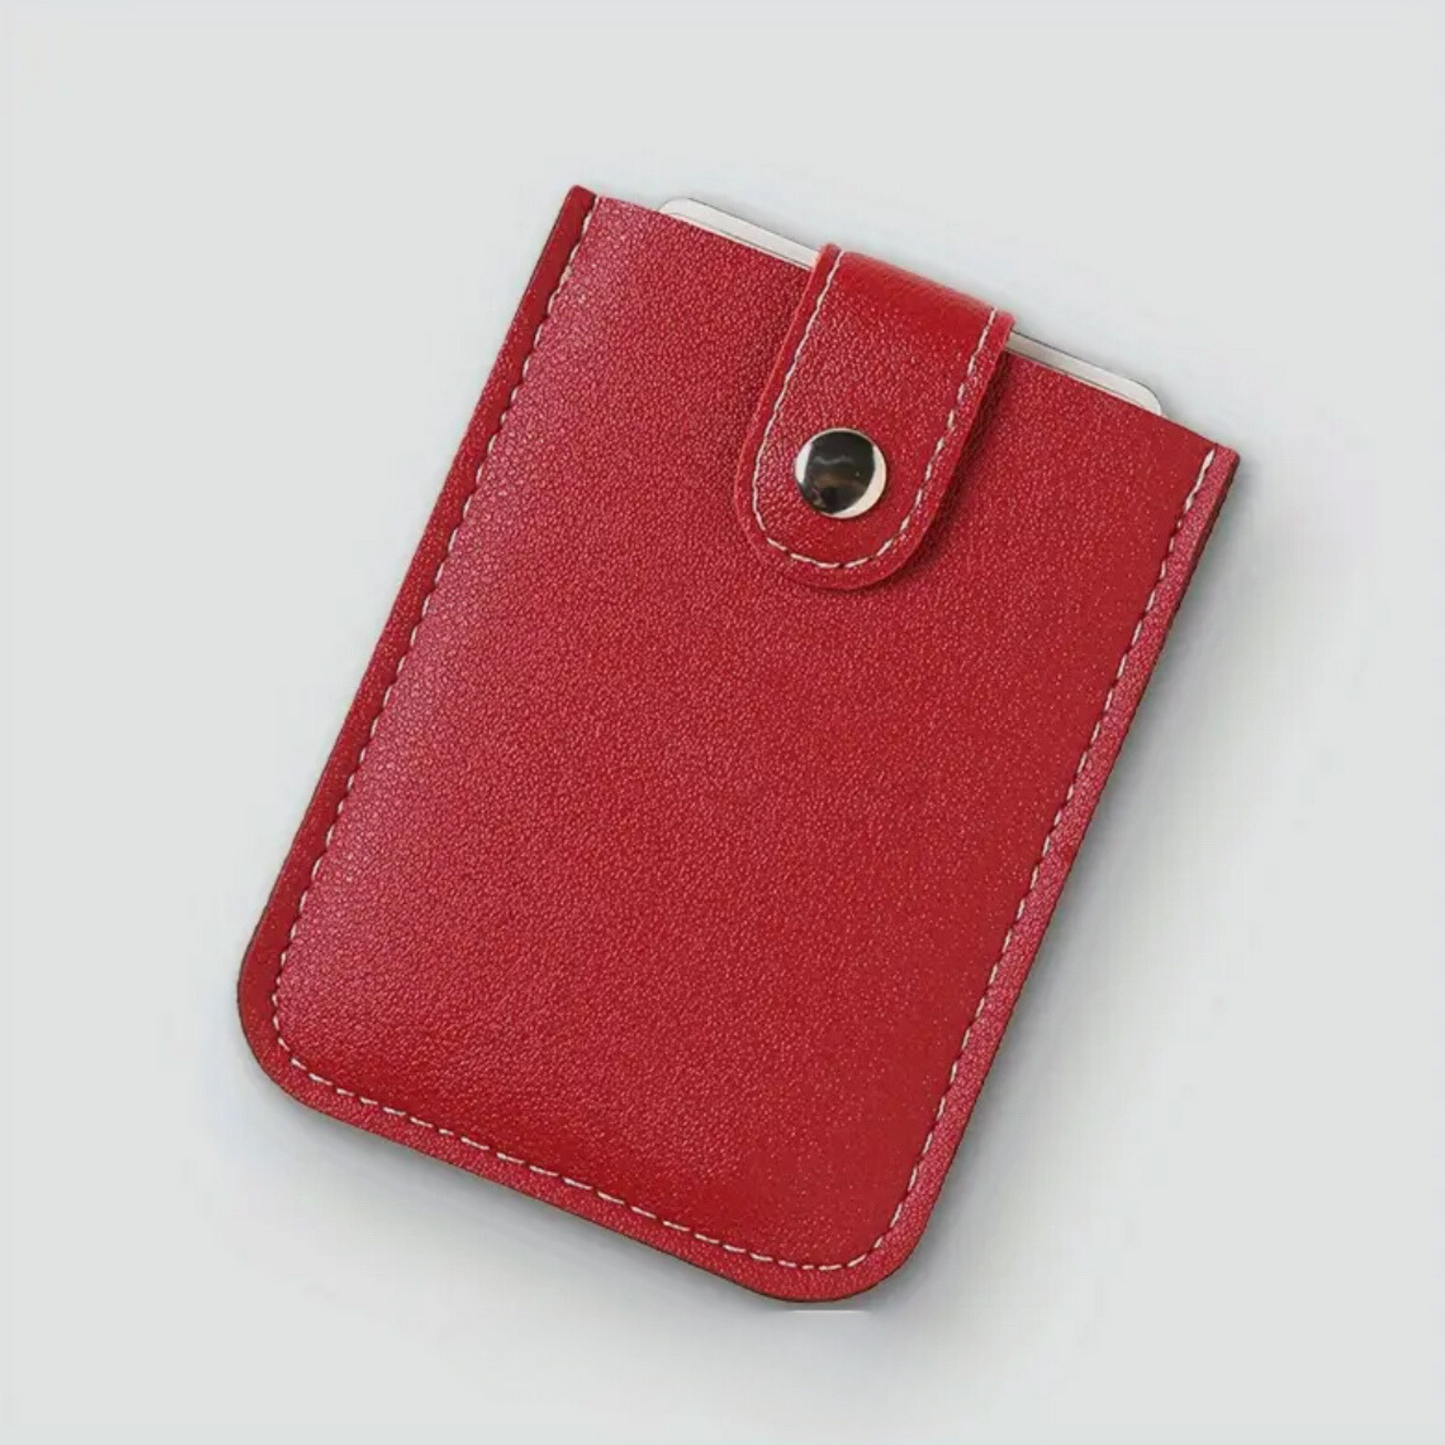 Credit Card Wallet ~ Leather Customized